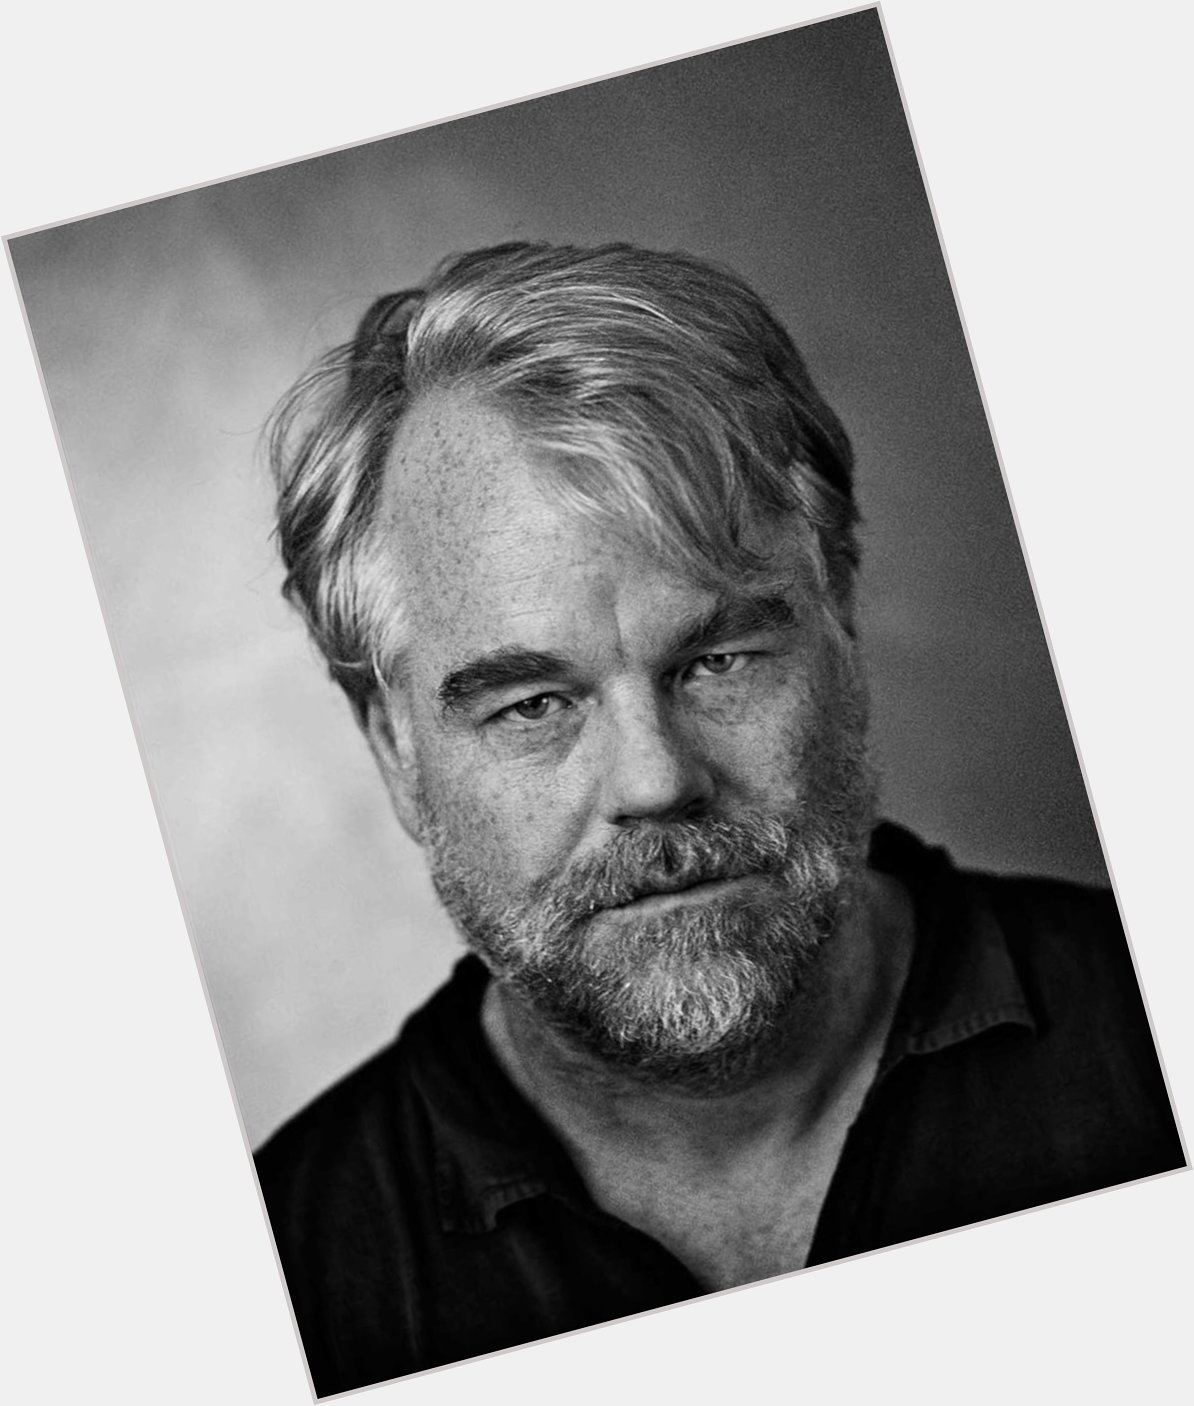 Happy Birthday, Philip Seymour Hoffman! He would\ve been 55 years old today. 